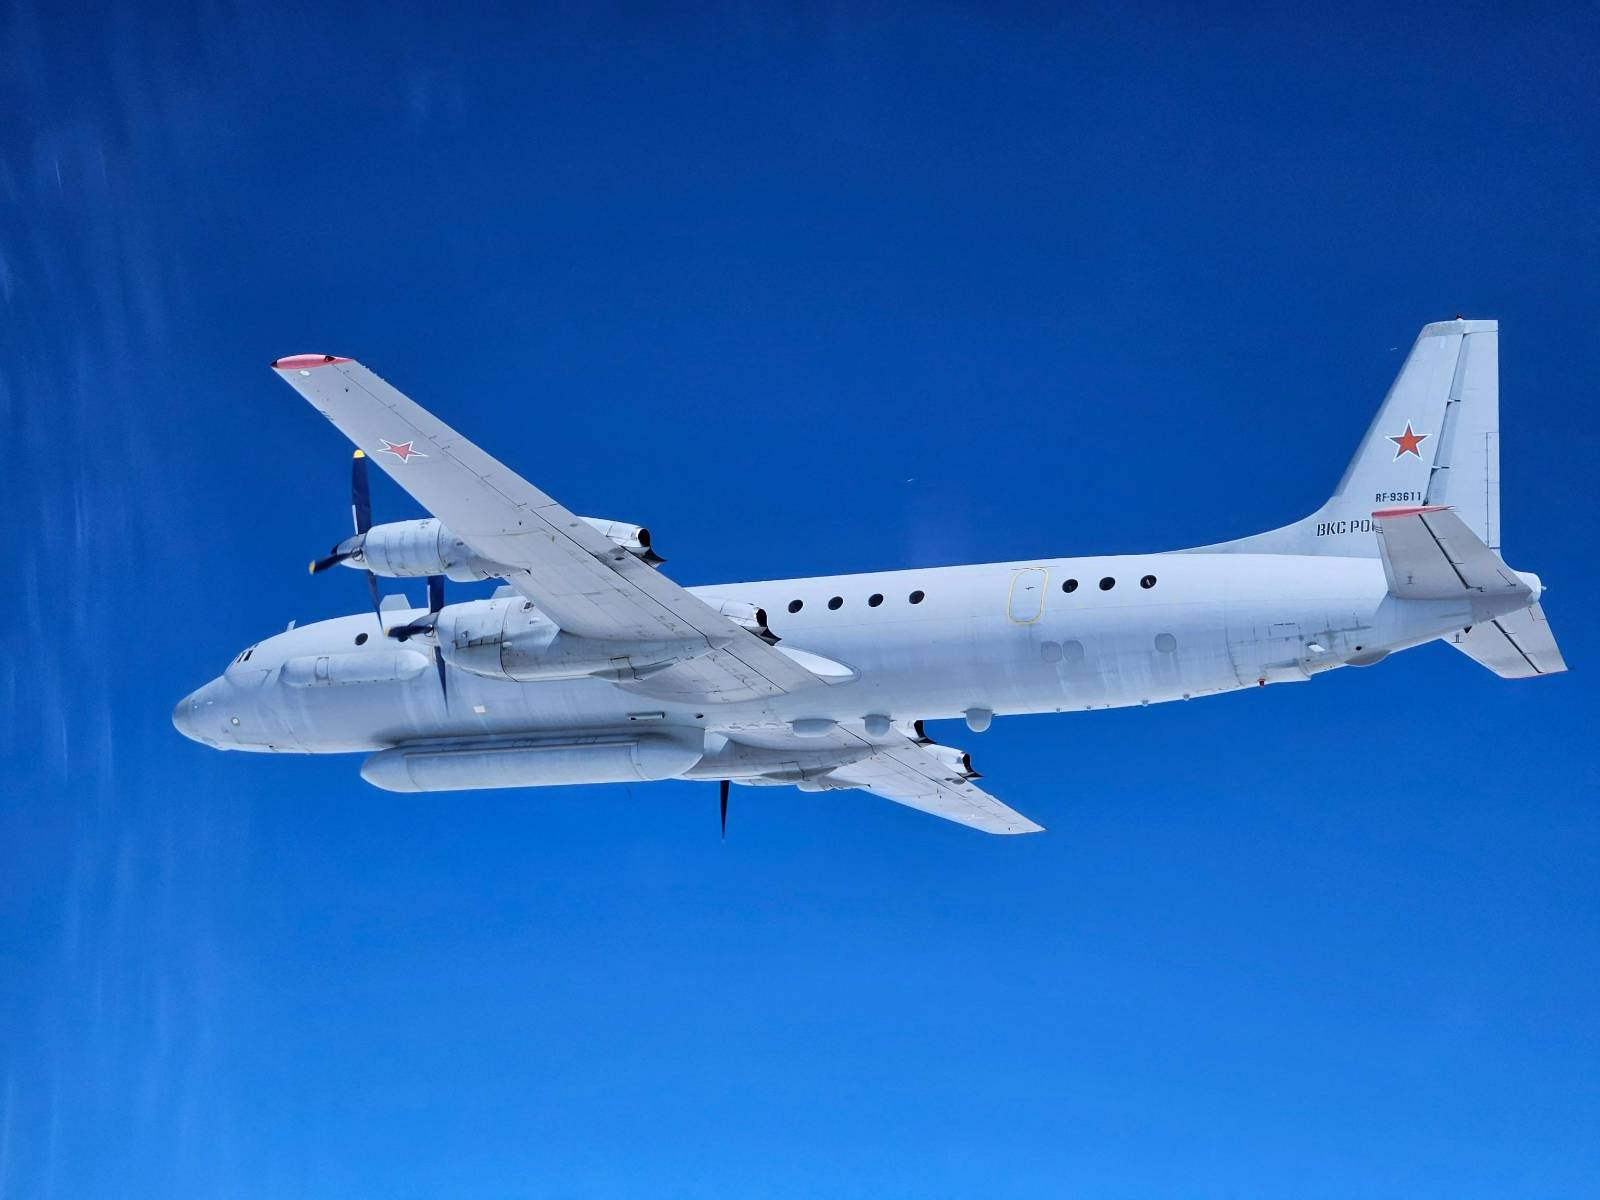 A gray Russian Il-20 aircraft, with tail ID RF-93611, is seen flying in clear blue skies. The image is taken a little below the left side of the aircraft. The Il-20 has two propellers attached on each of its wings.